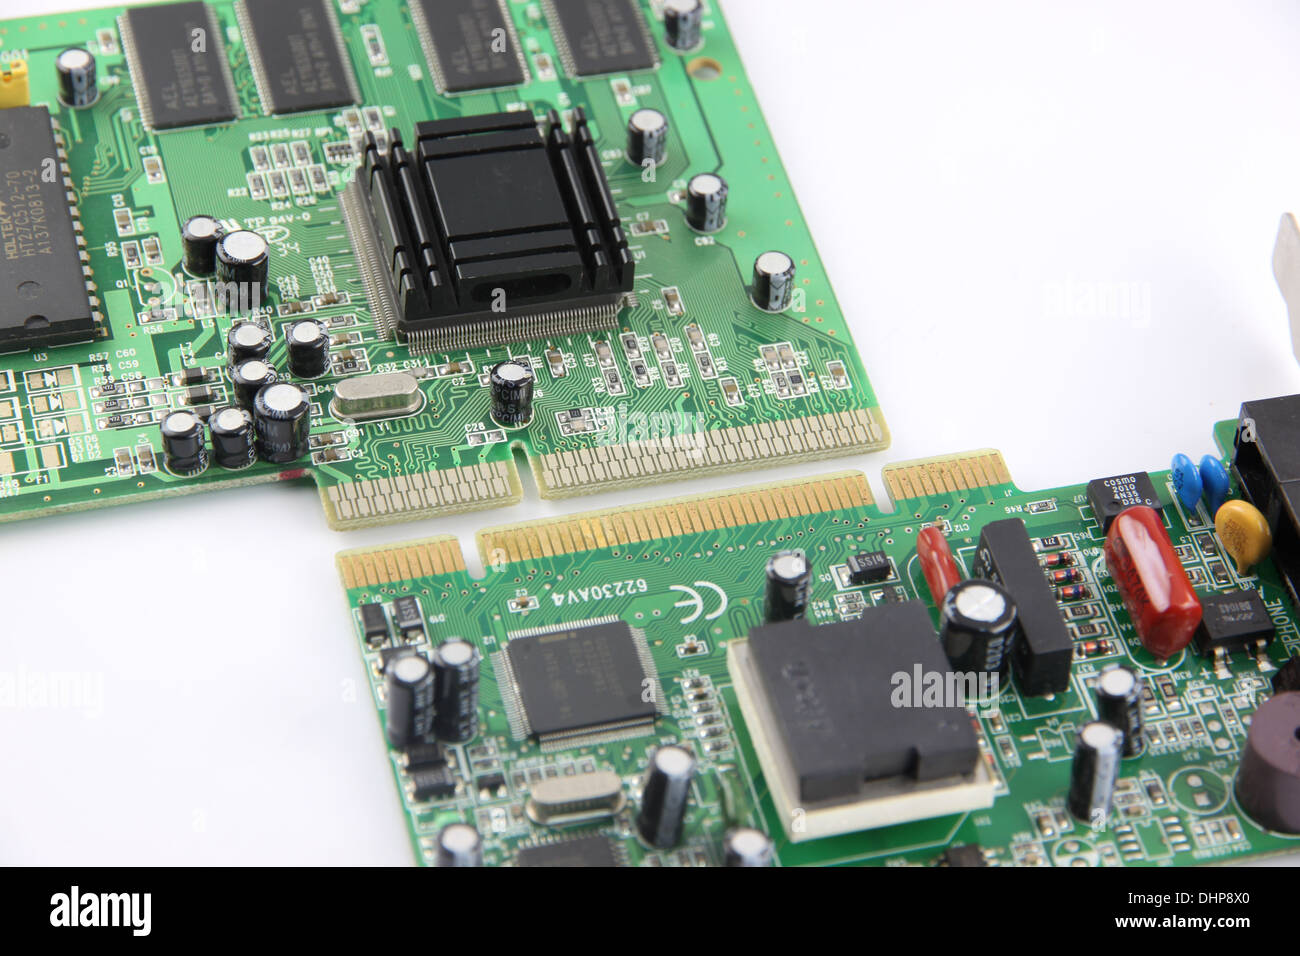 Image processing the Computer equipment circuit board on white background. Stock Photo